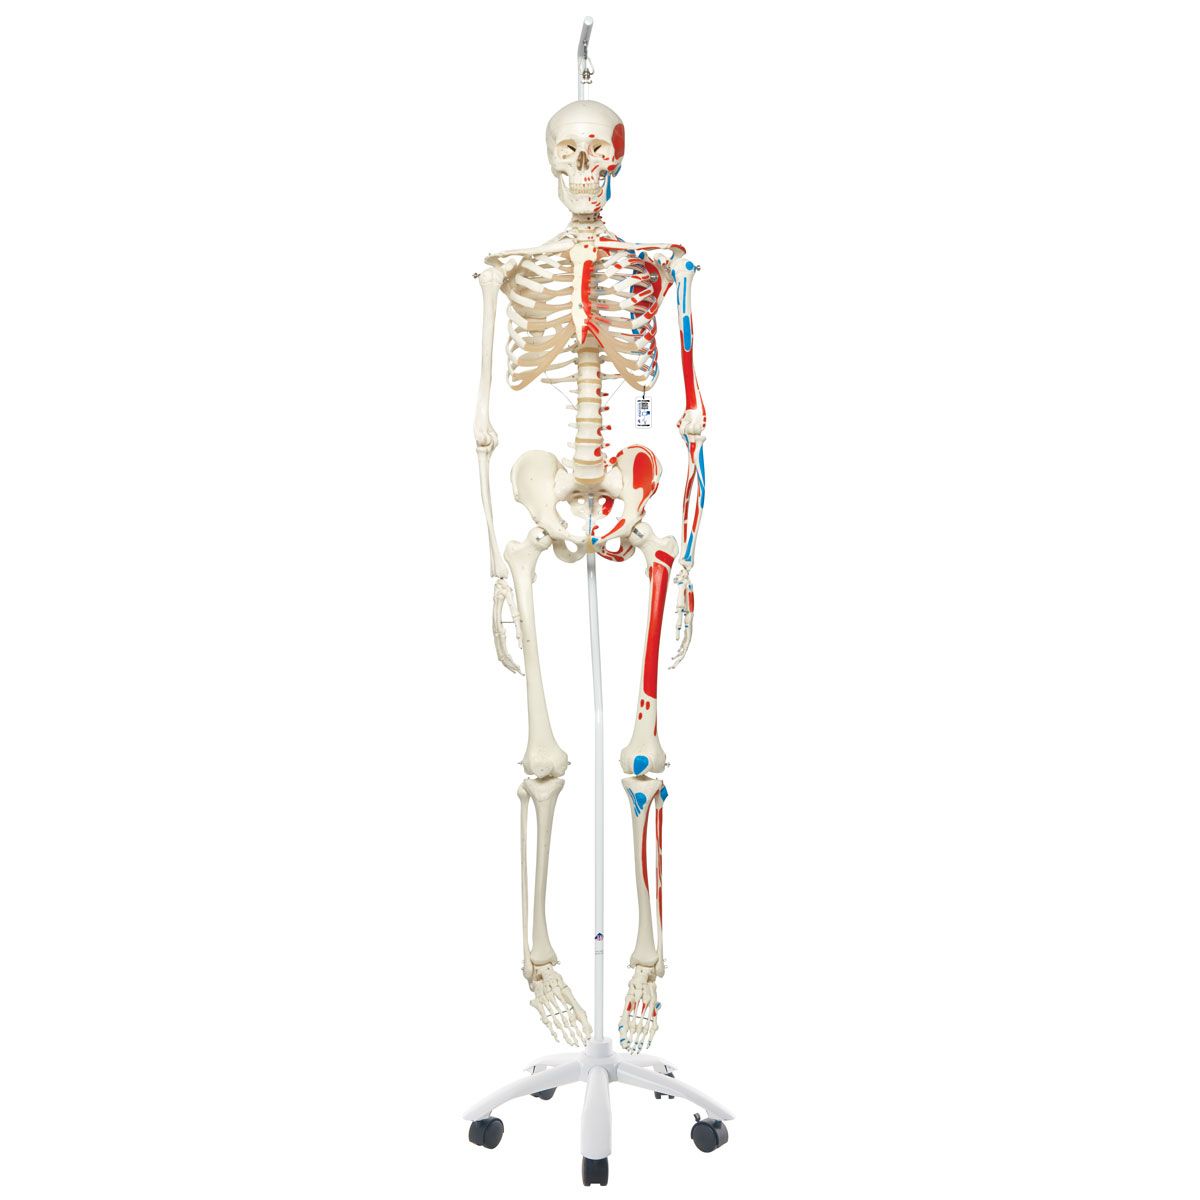 Human Skeleton Model Max on Hanging Stand with Painted Muscle Origins & Inserts - 3B Smart Anatomy